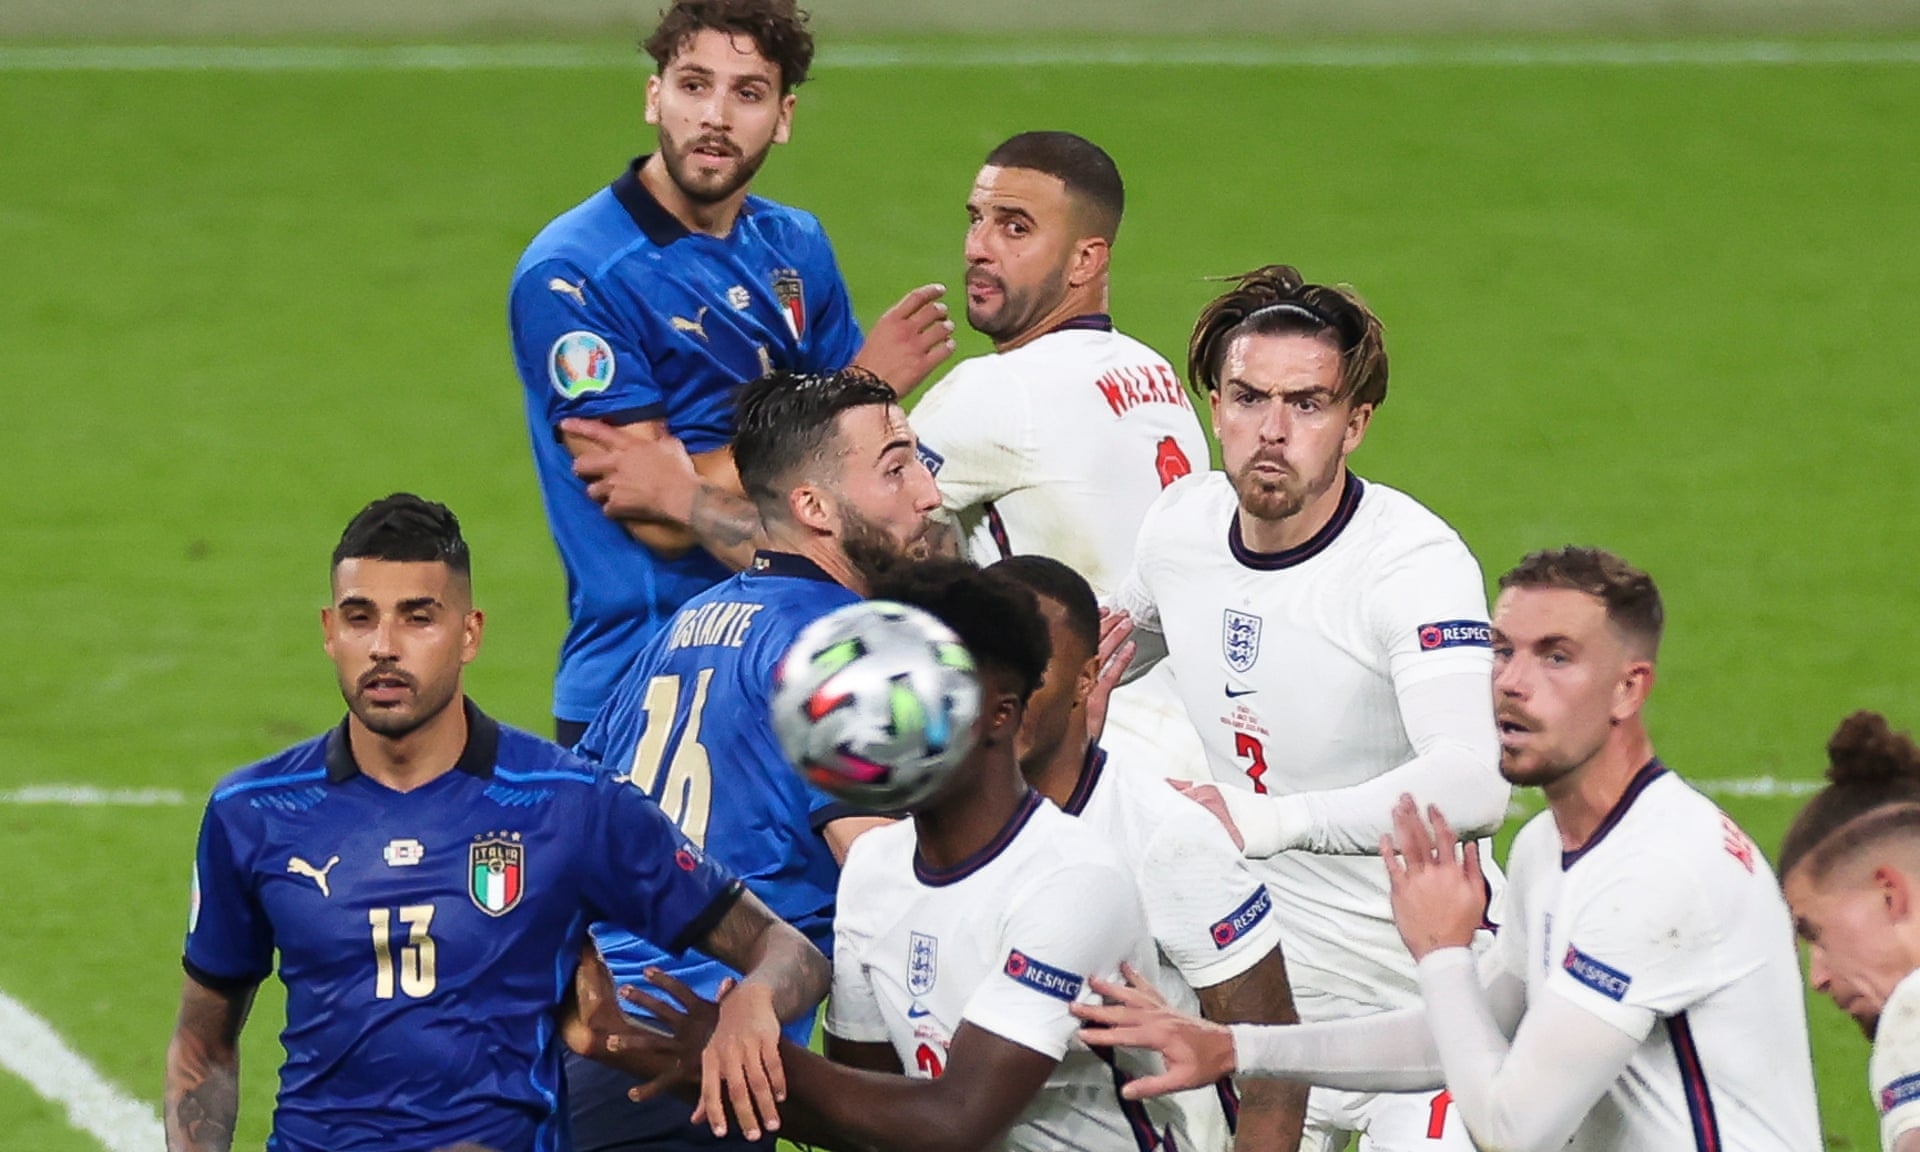 RESULT England 1 - 1 Italy (2-3 PENALTY): Highlights, Goals - Euro 2020 Final